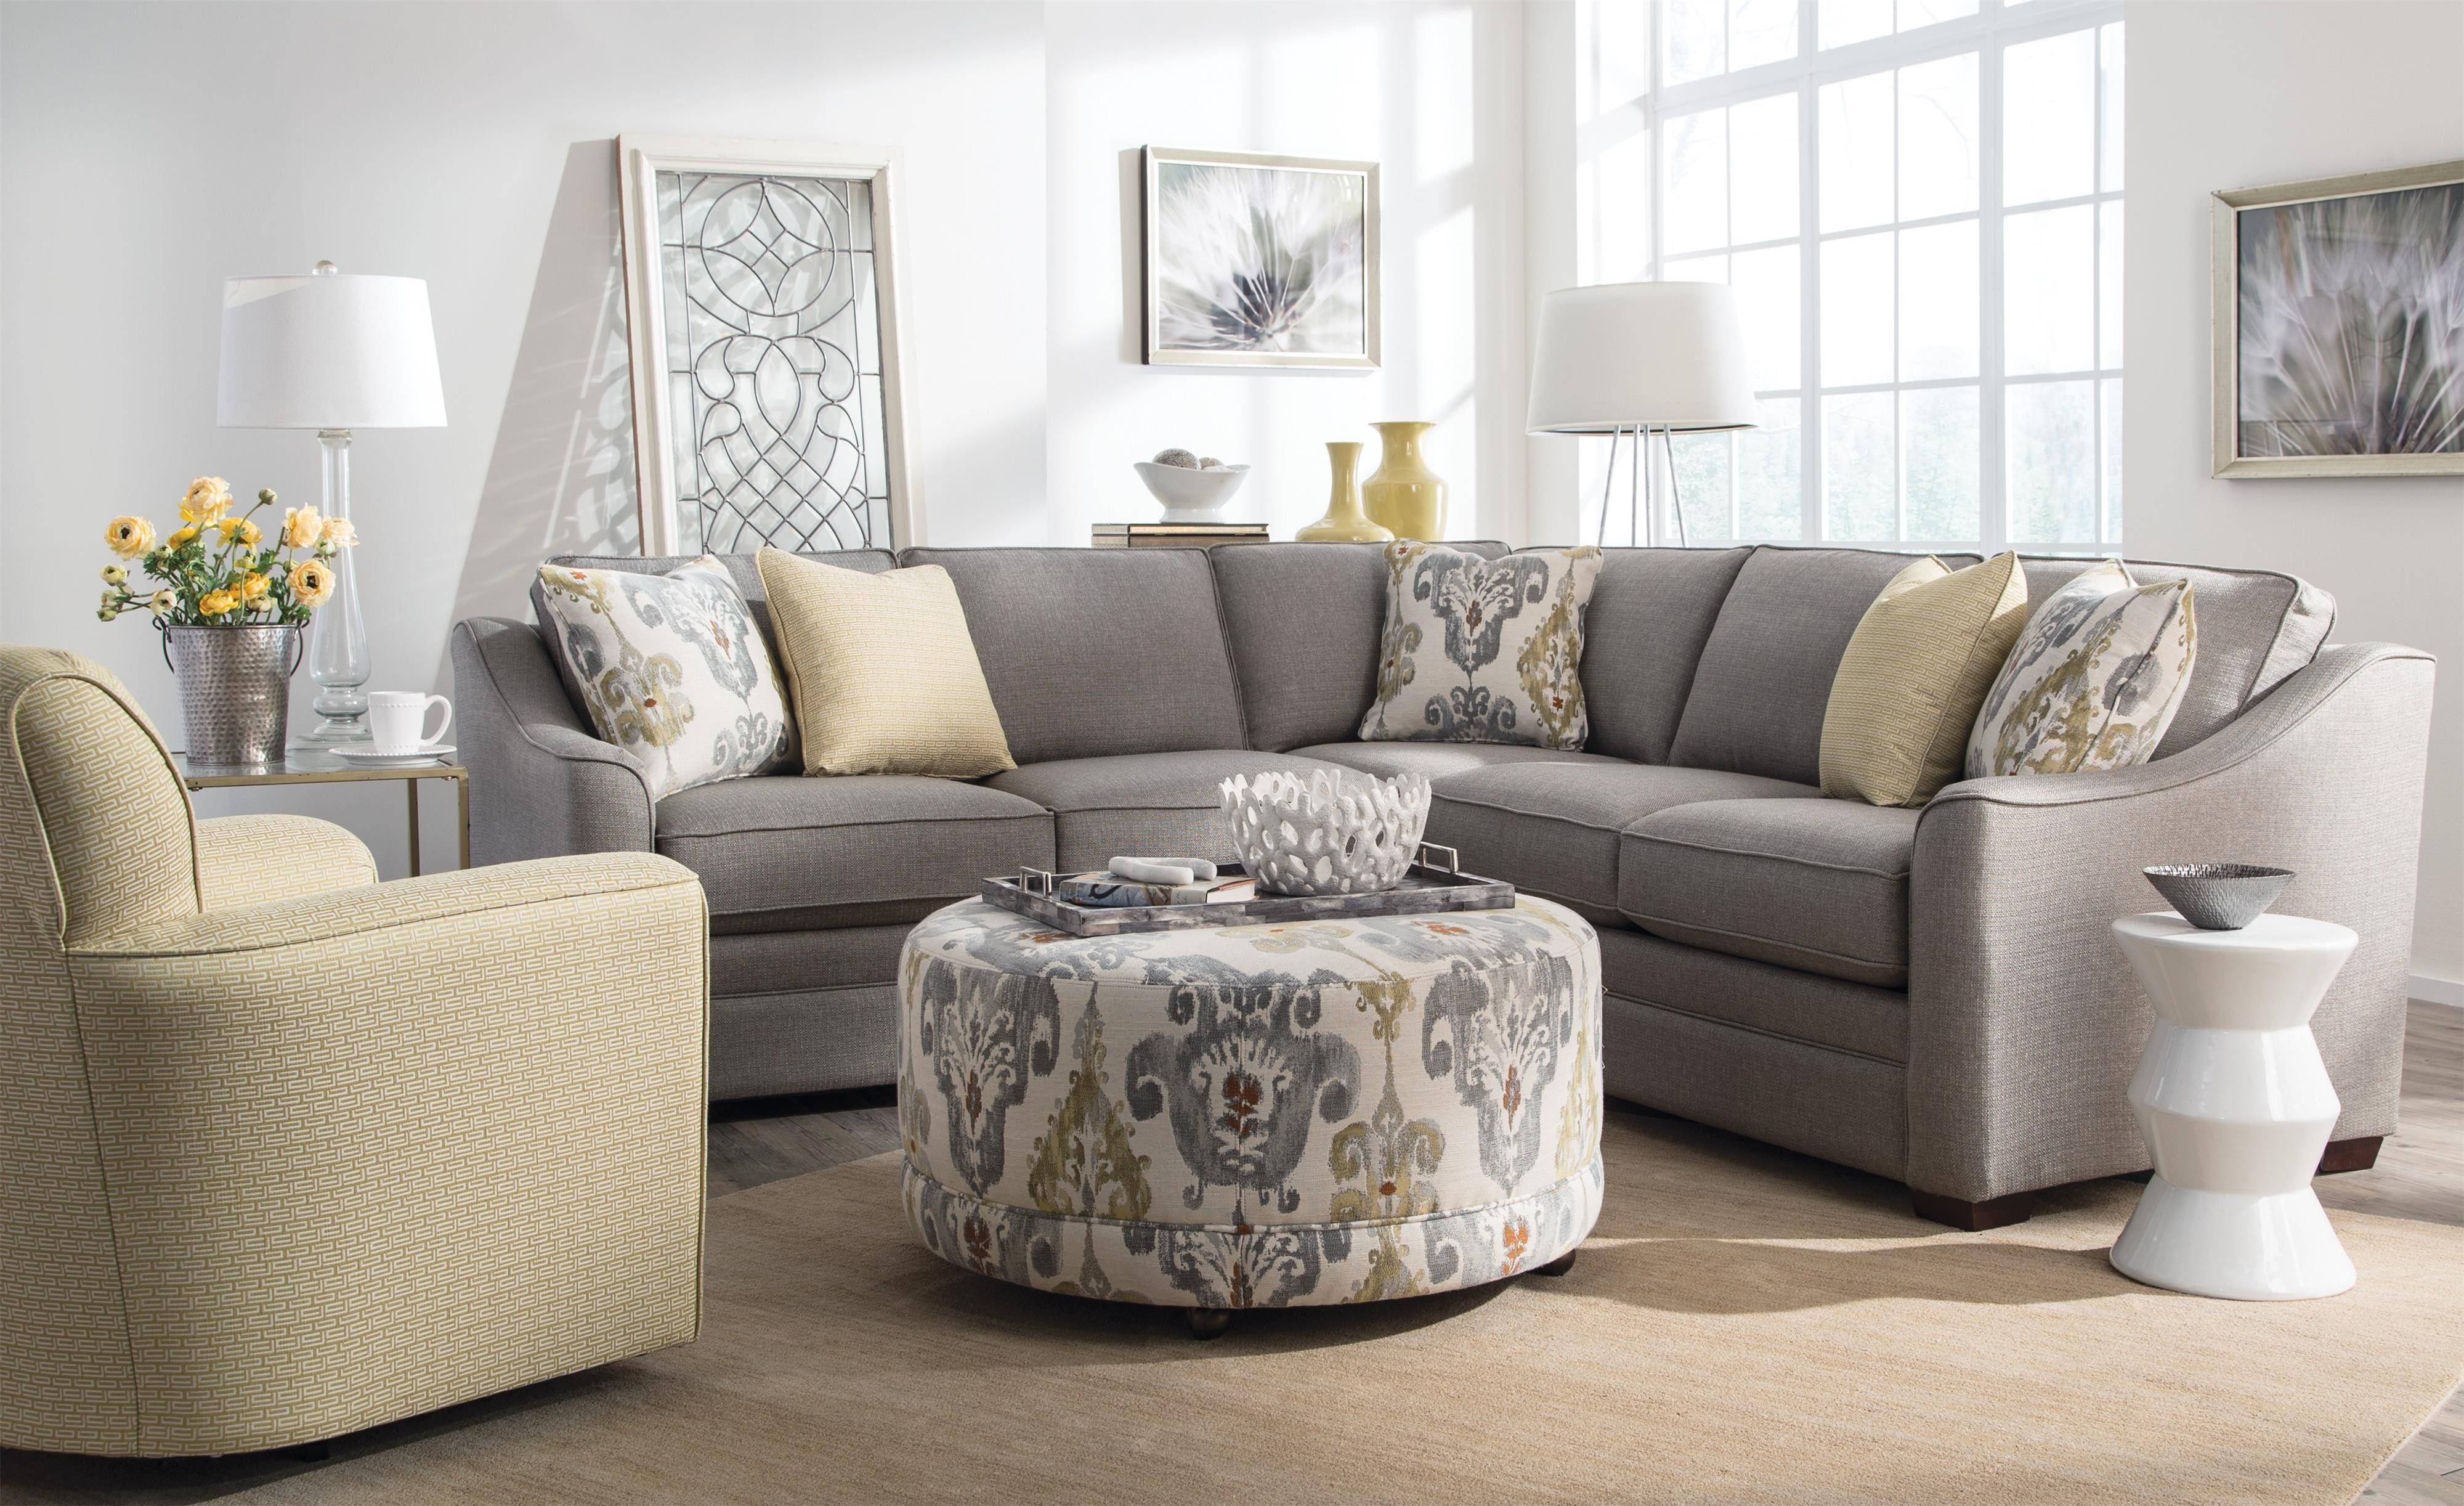 Cozy Life F9 Custom Collection Dancer 3 Piece Sectional W/ Raf Throughout Cuddler Sectional Sofa (View 28 of 30)